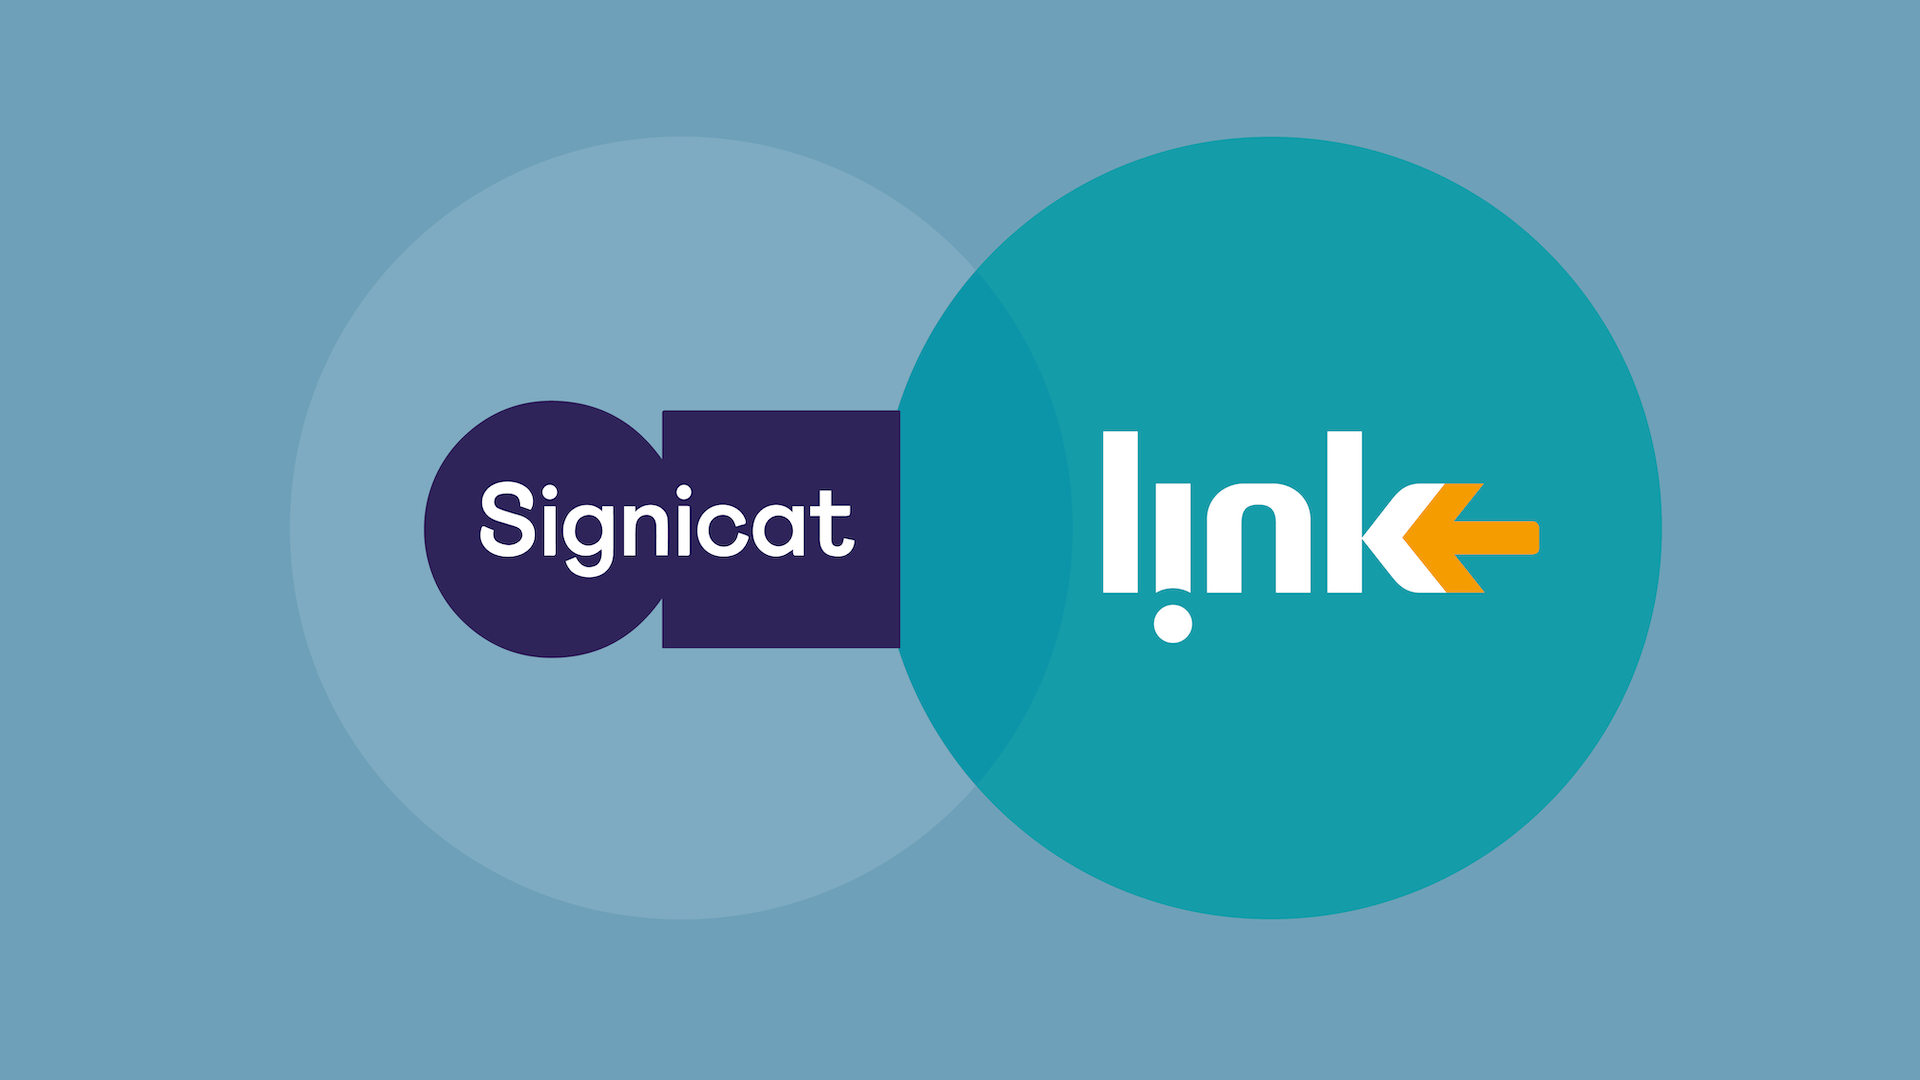 Link Consulting and Signicat offer a legally binding identity verification solution to expand financial services in full compliance across Europe